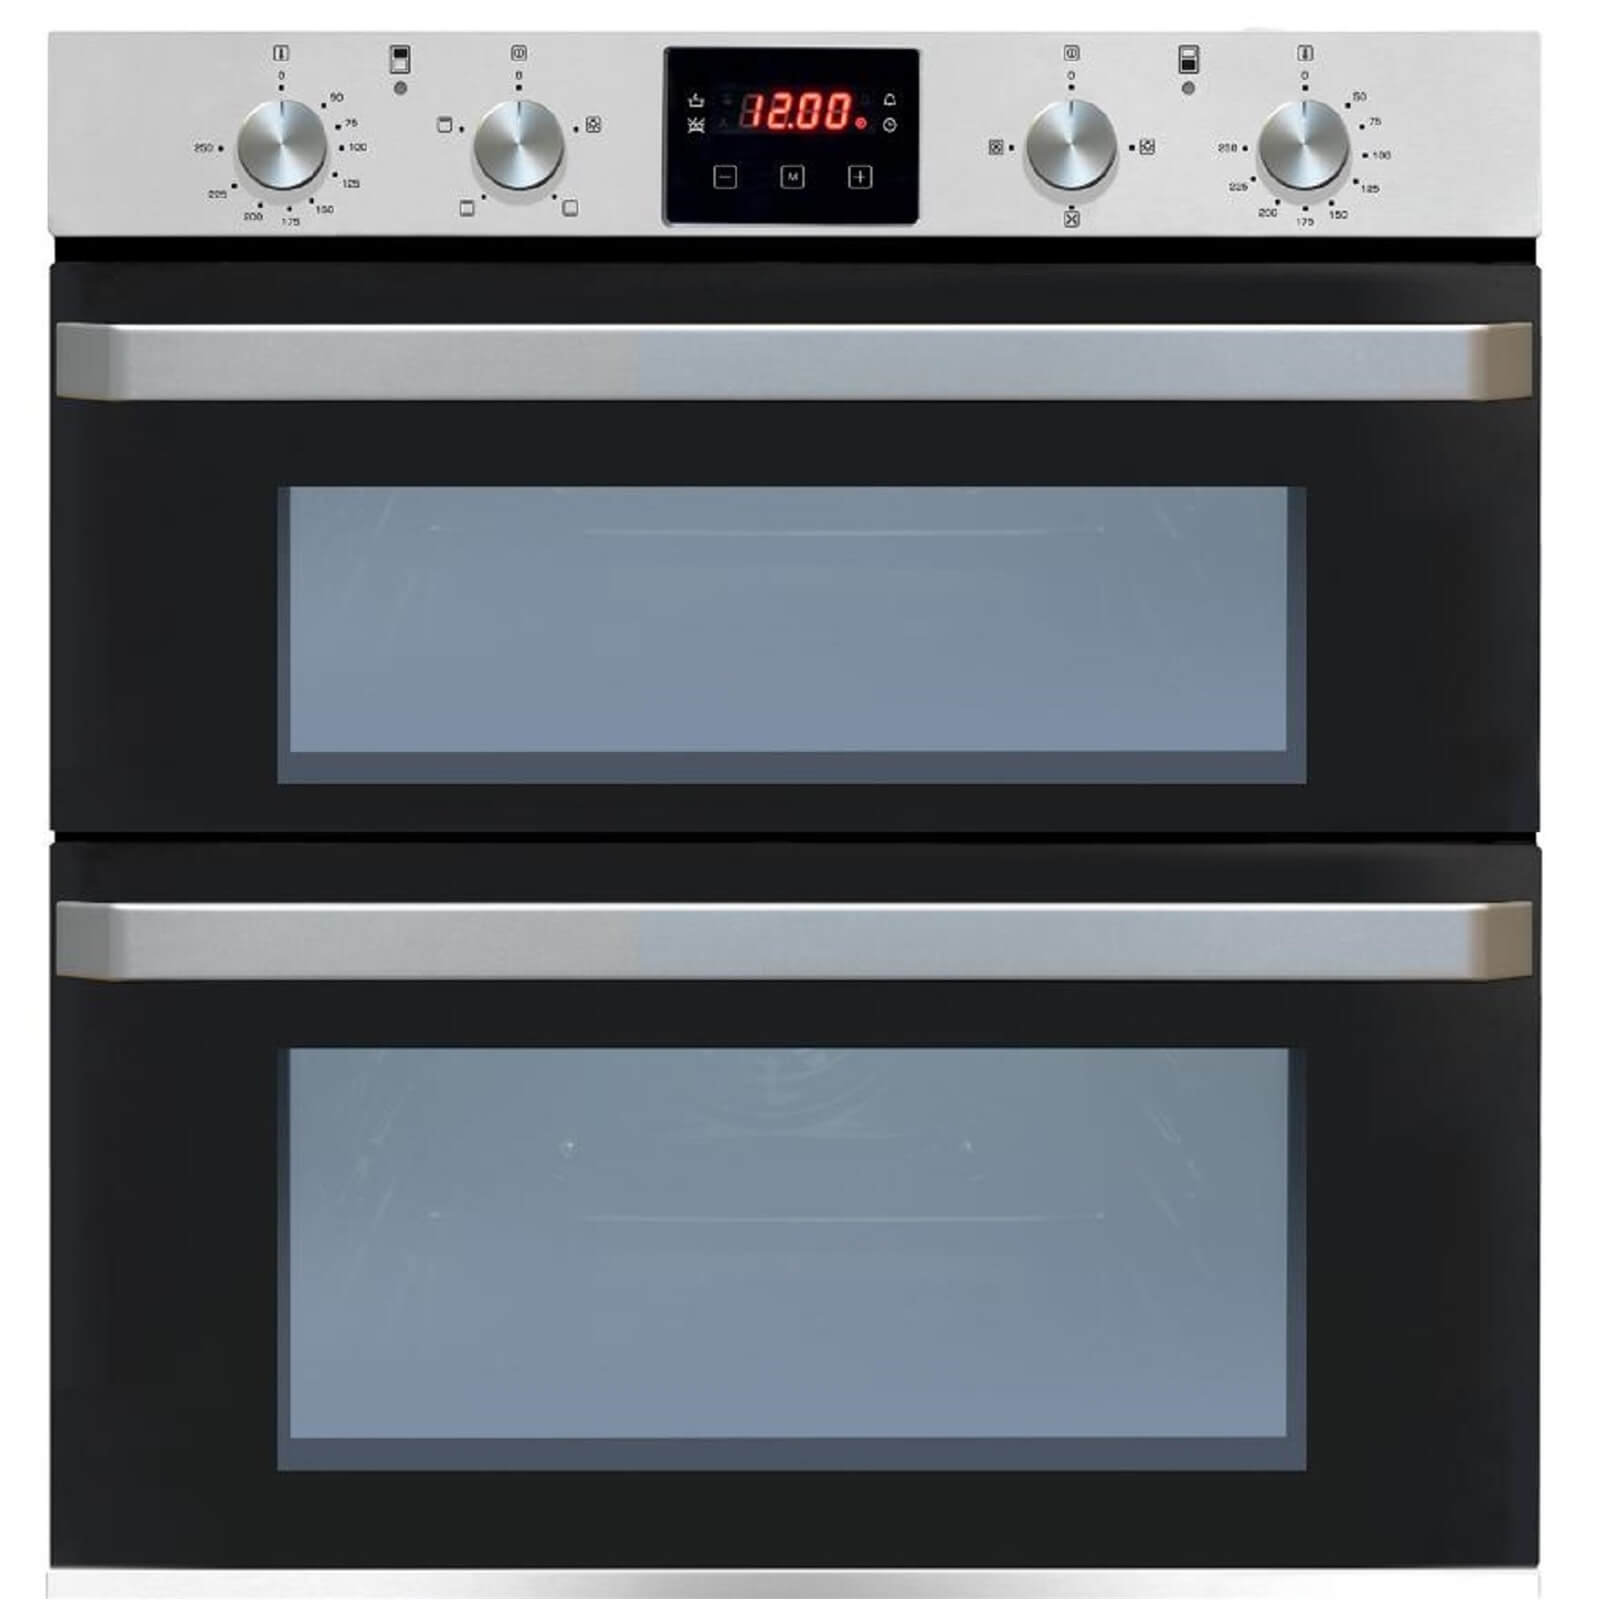 Matrix MD721SS Built Under Double Electric Oven